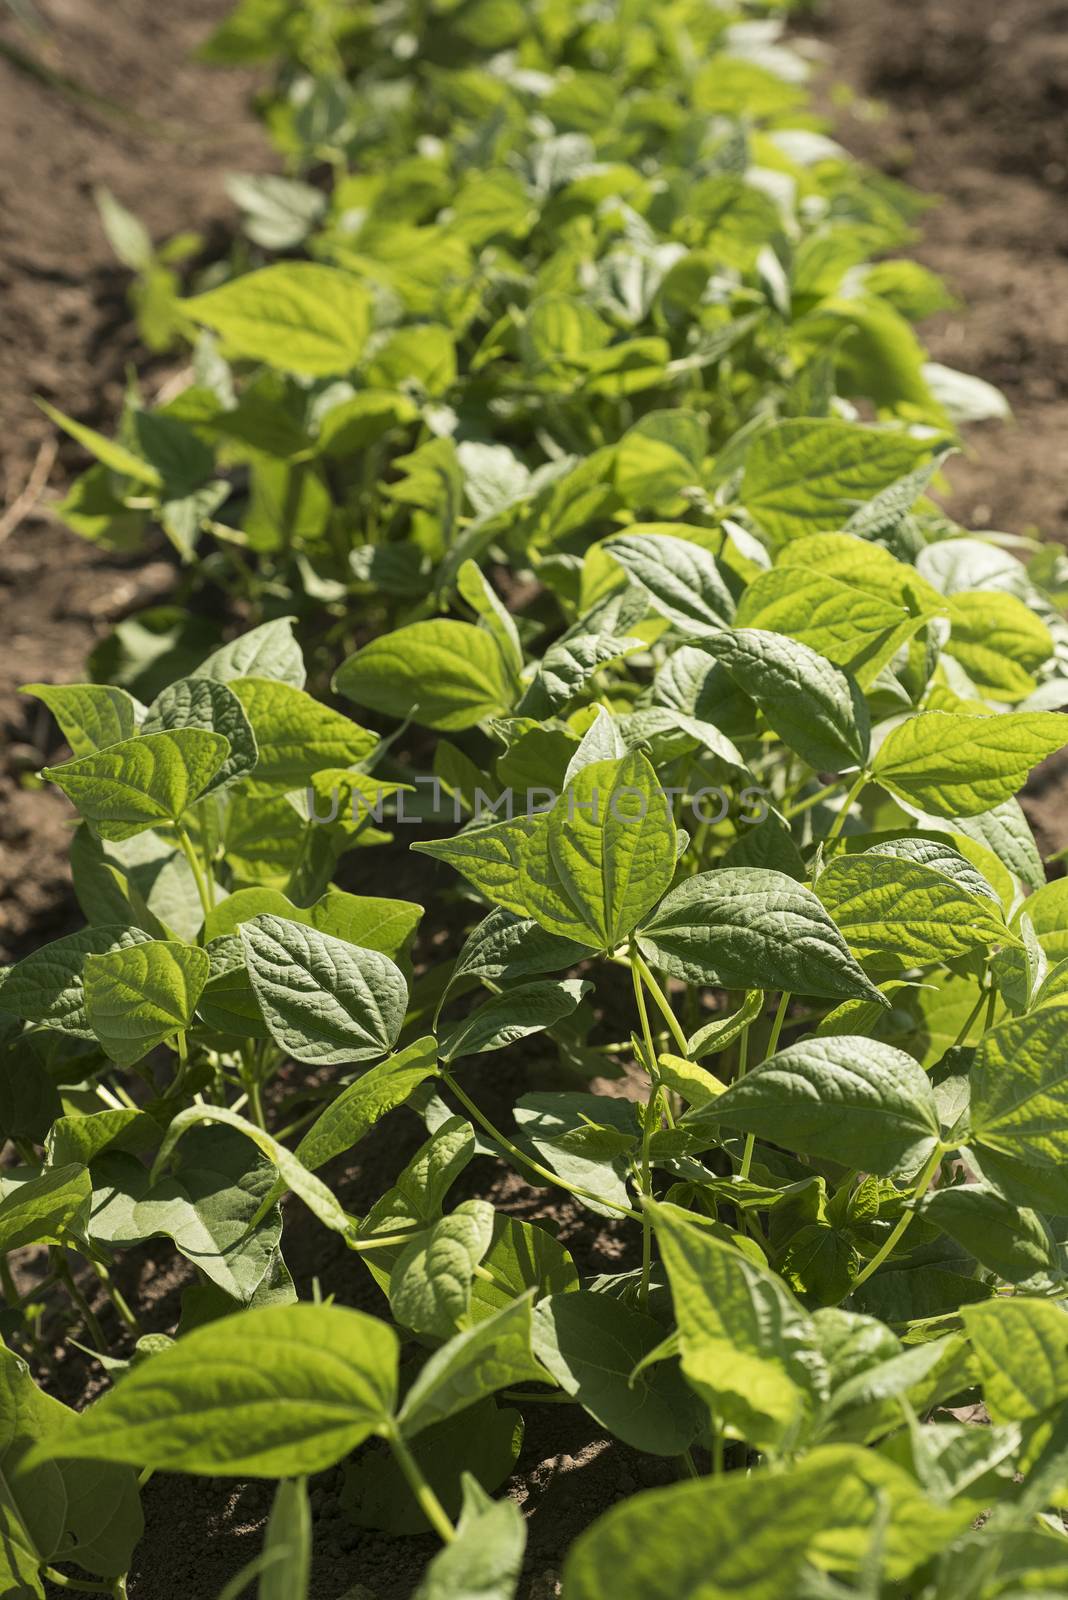 Bean plants in the garden by jalonsohu@gmail.com